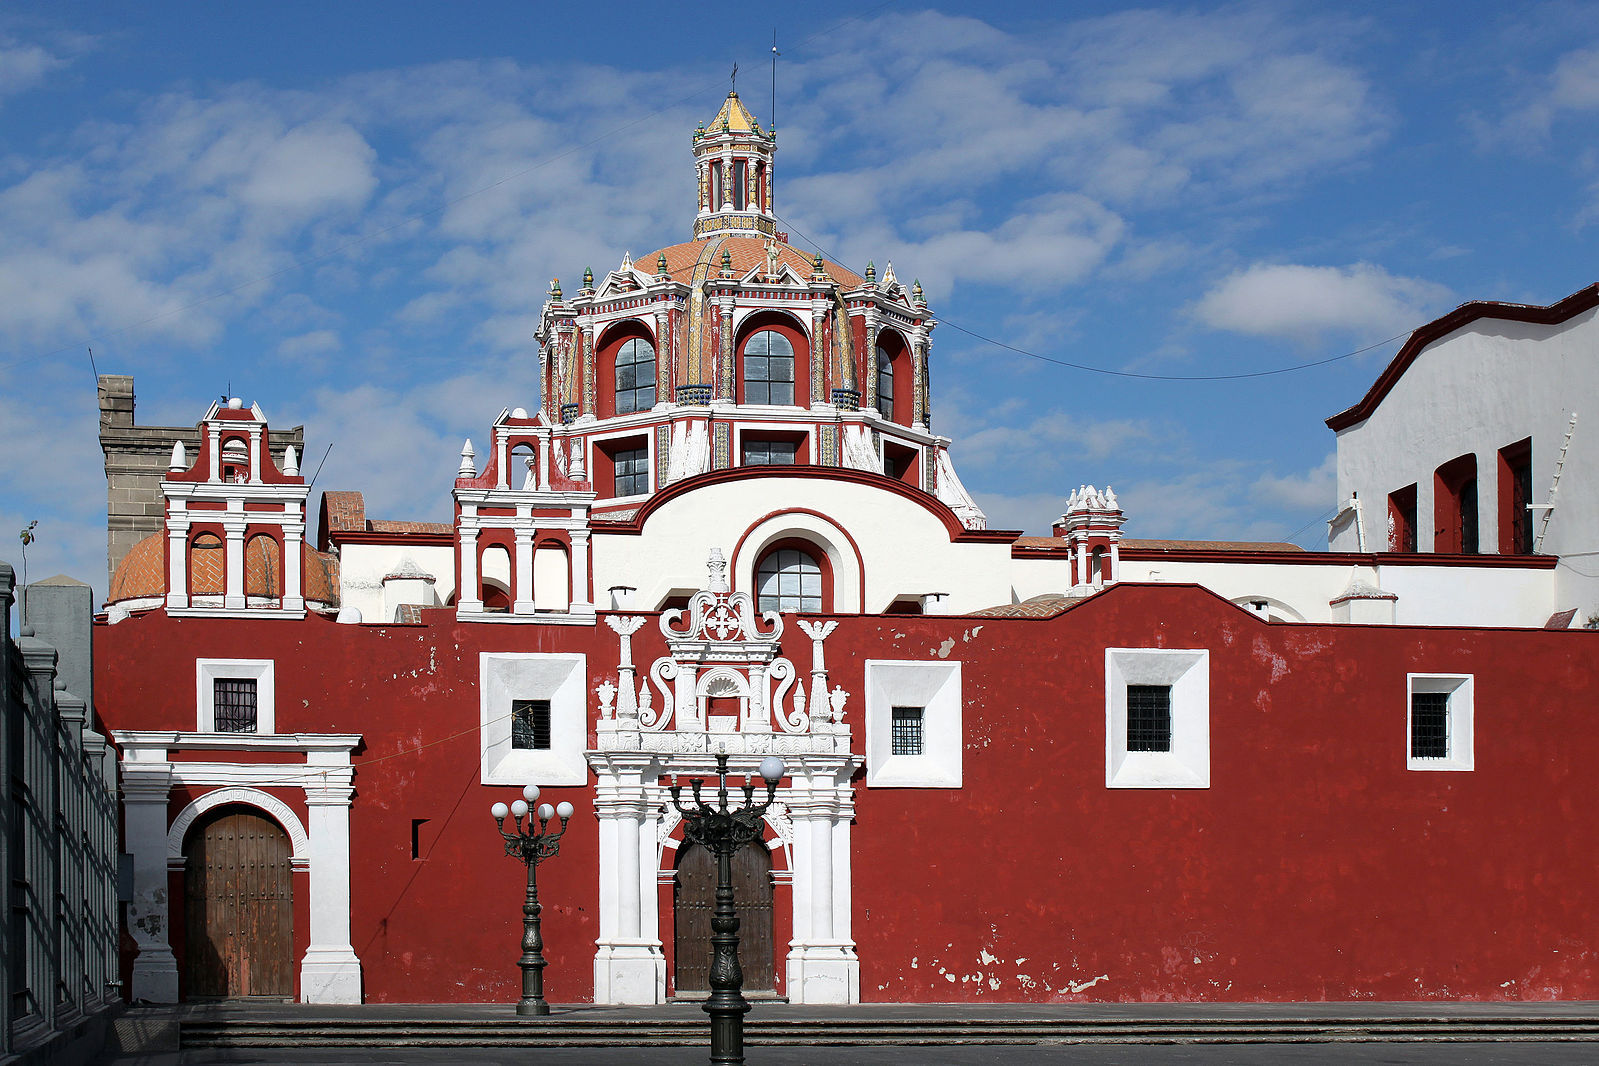 red and white building with an elaborate dome